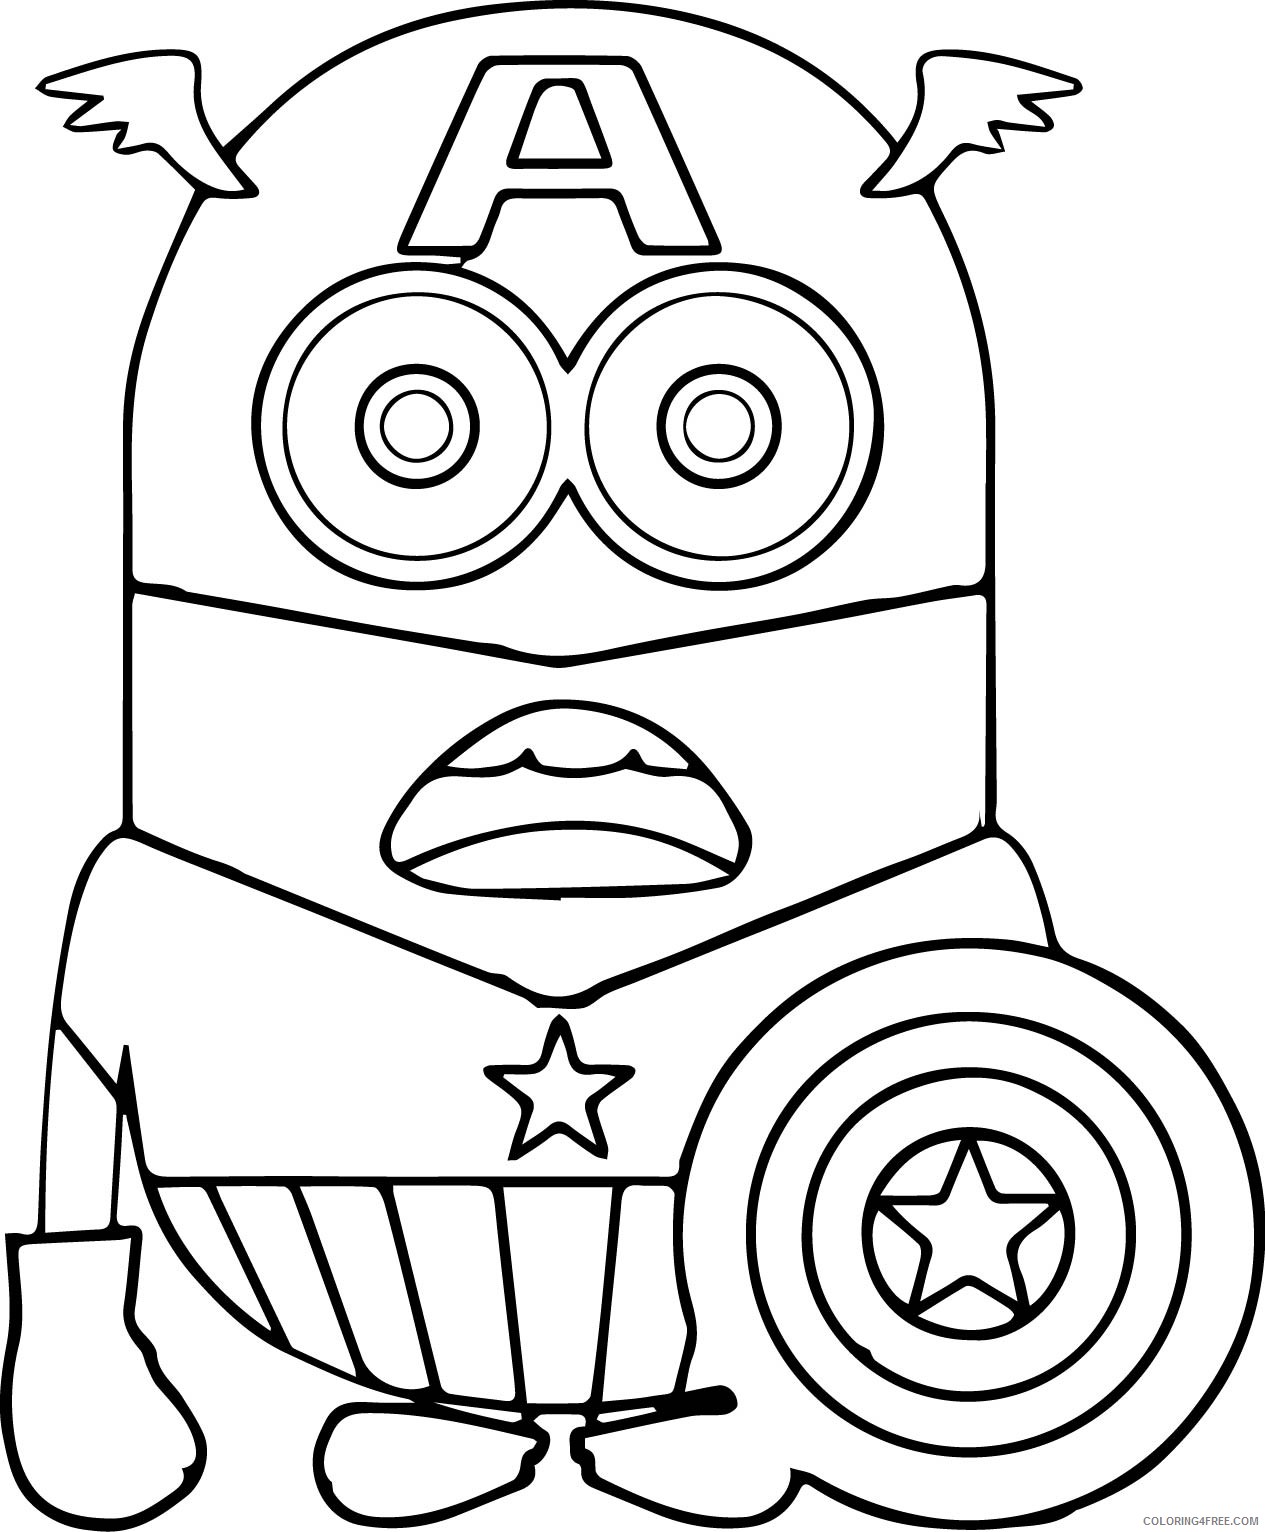 minions coloring pages captain america Coloring4free